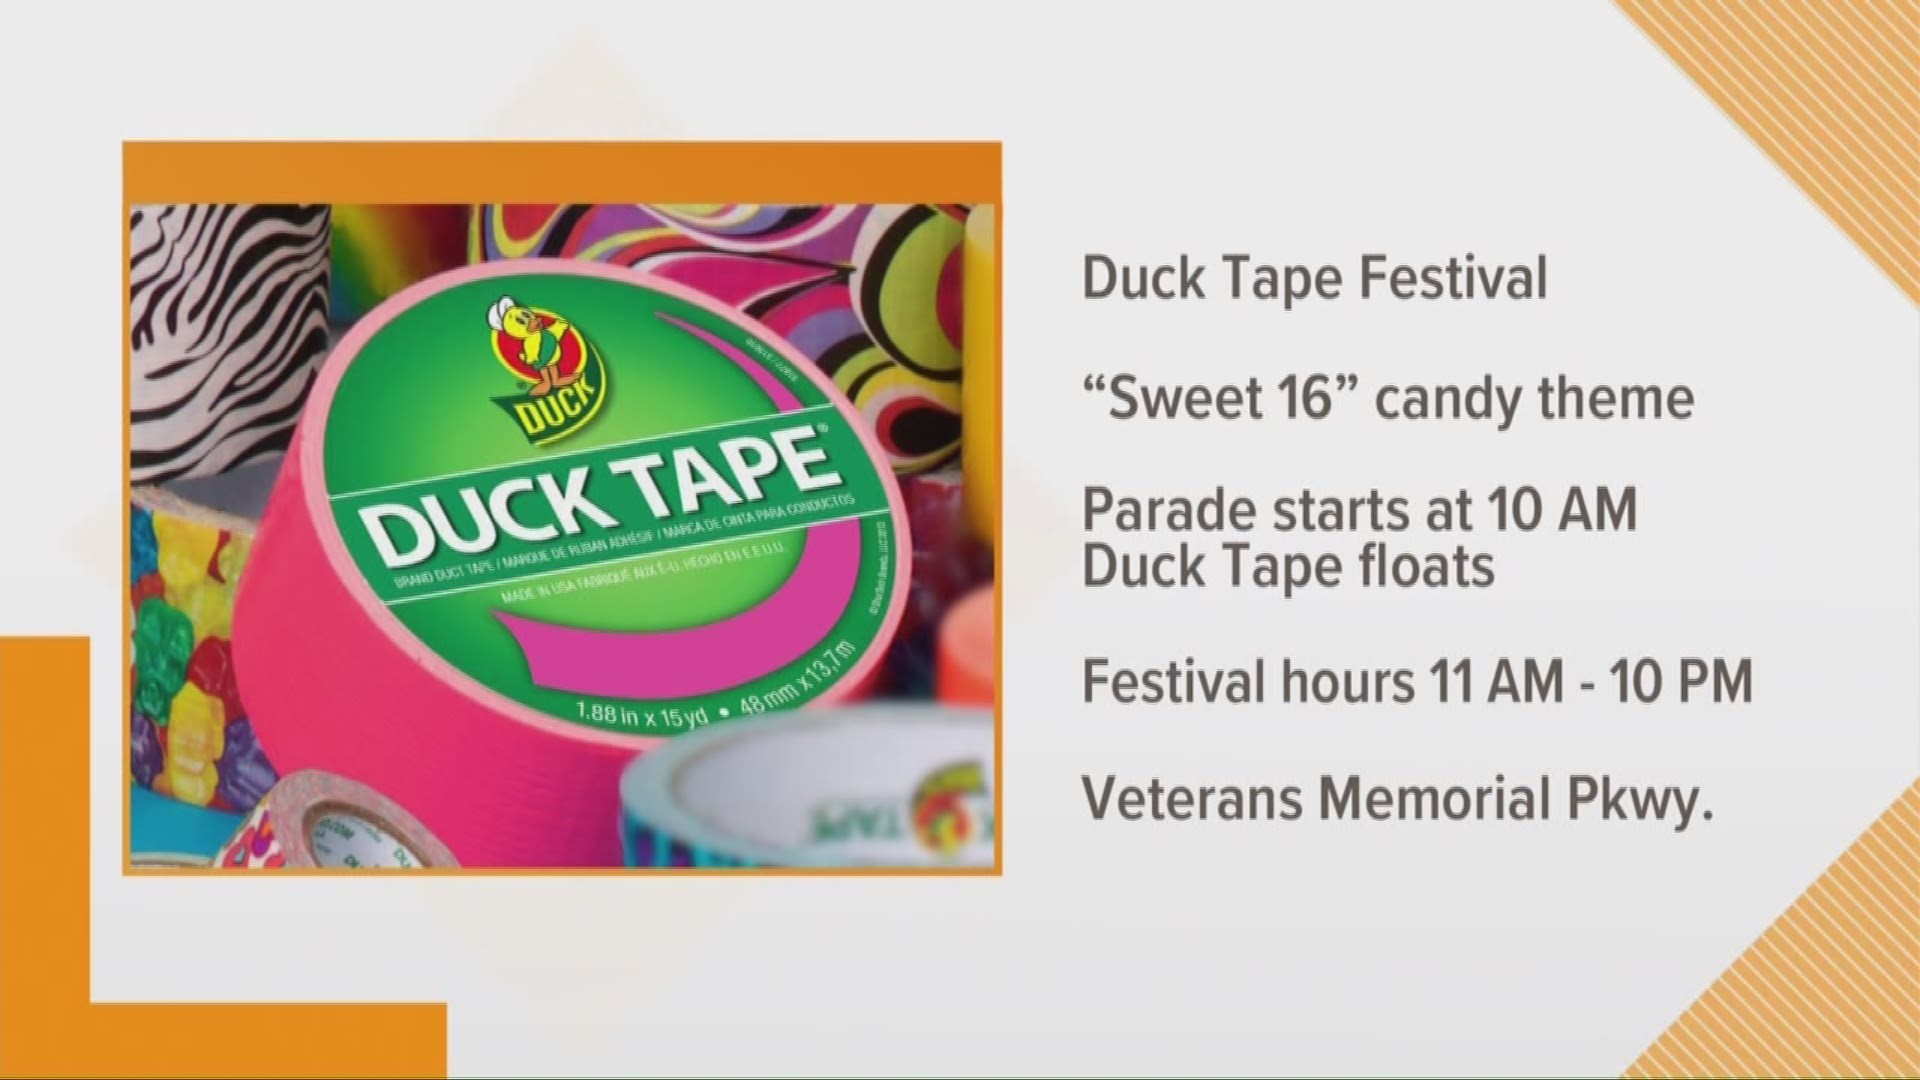 Lindsay shows us a couch made of Duck Tape and other things to see and do at the Avon Duck Tape Festival.